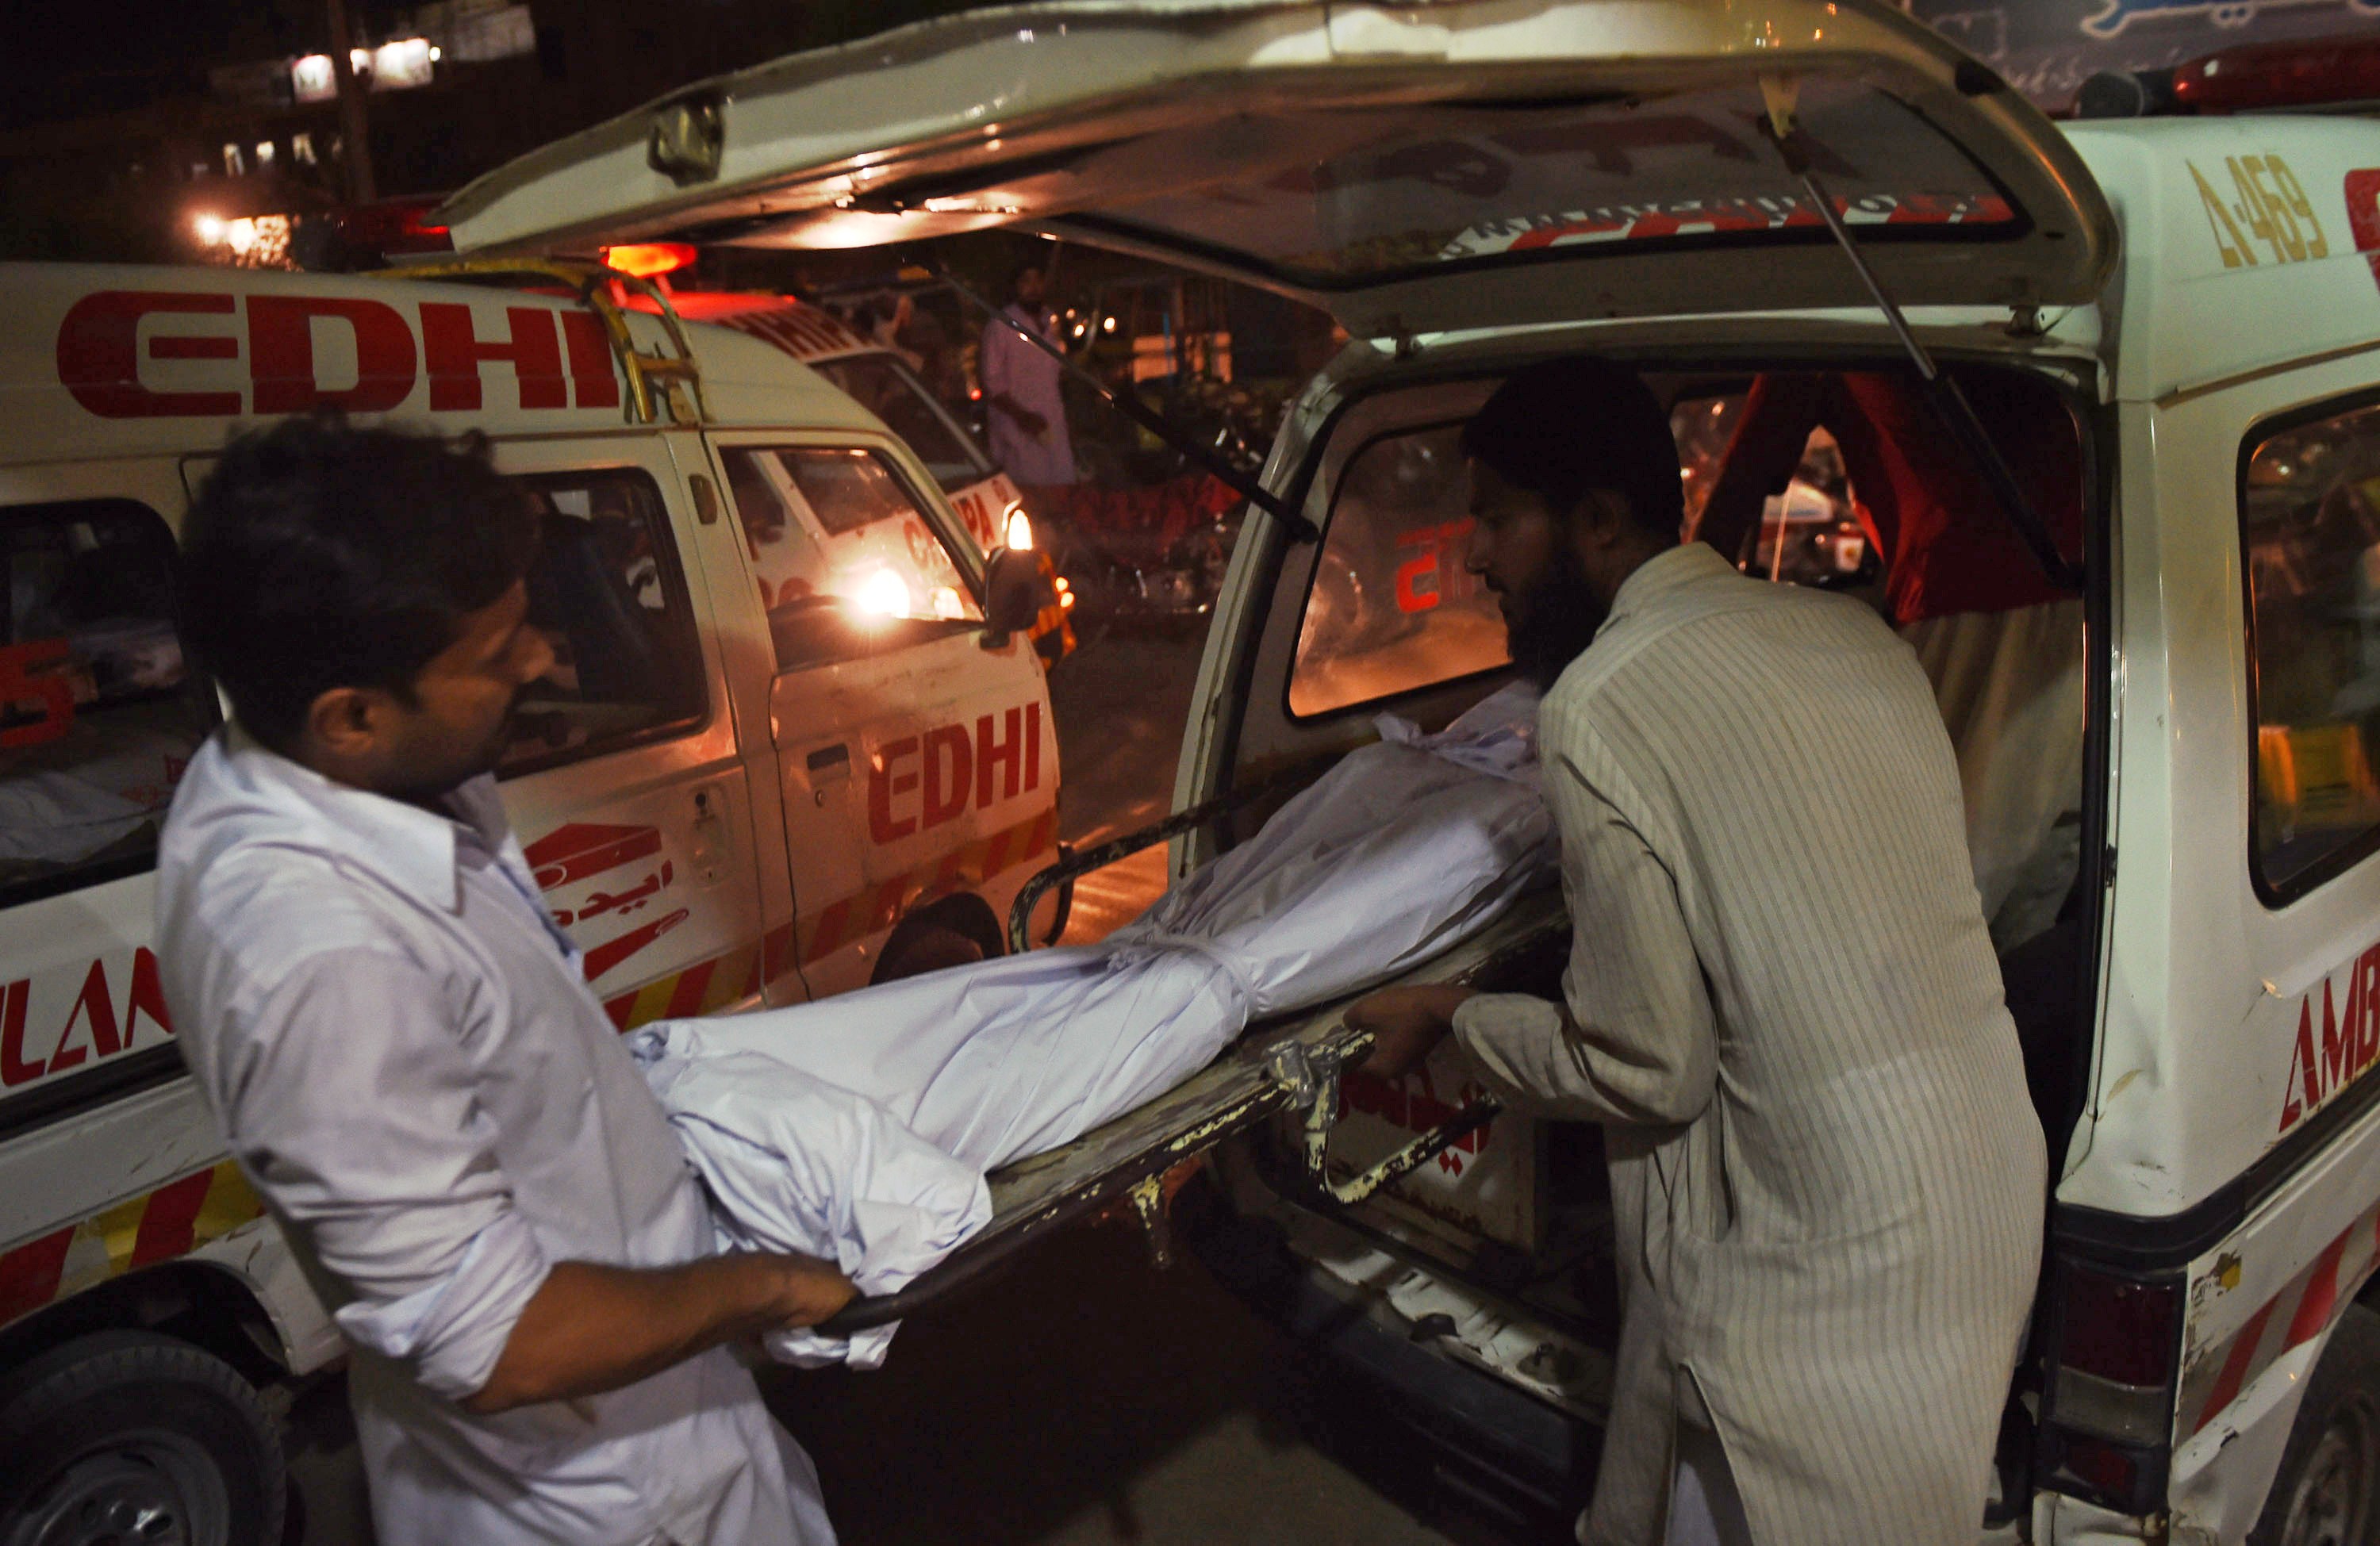 Relatives shift the dead body of a heatwave victim into an ambulance at the EDHI morgue in Karachi on June 21, 2015. (Asif Hassan—AFP/Getty Images)